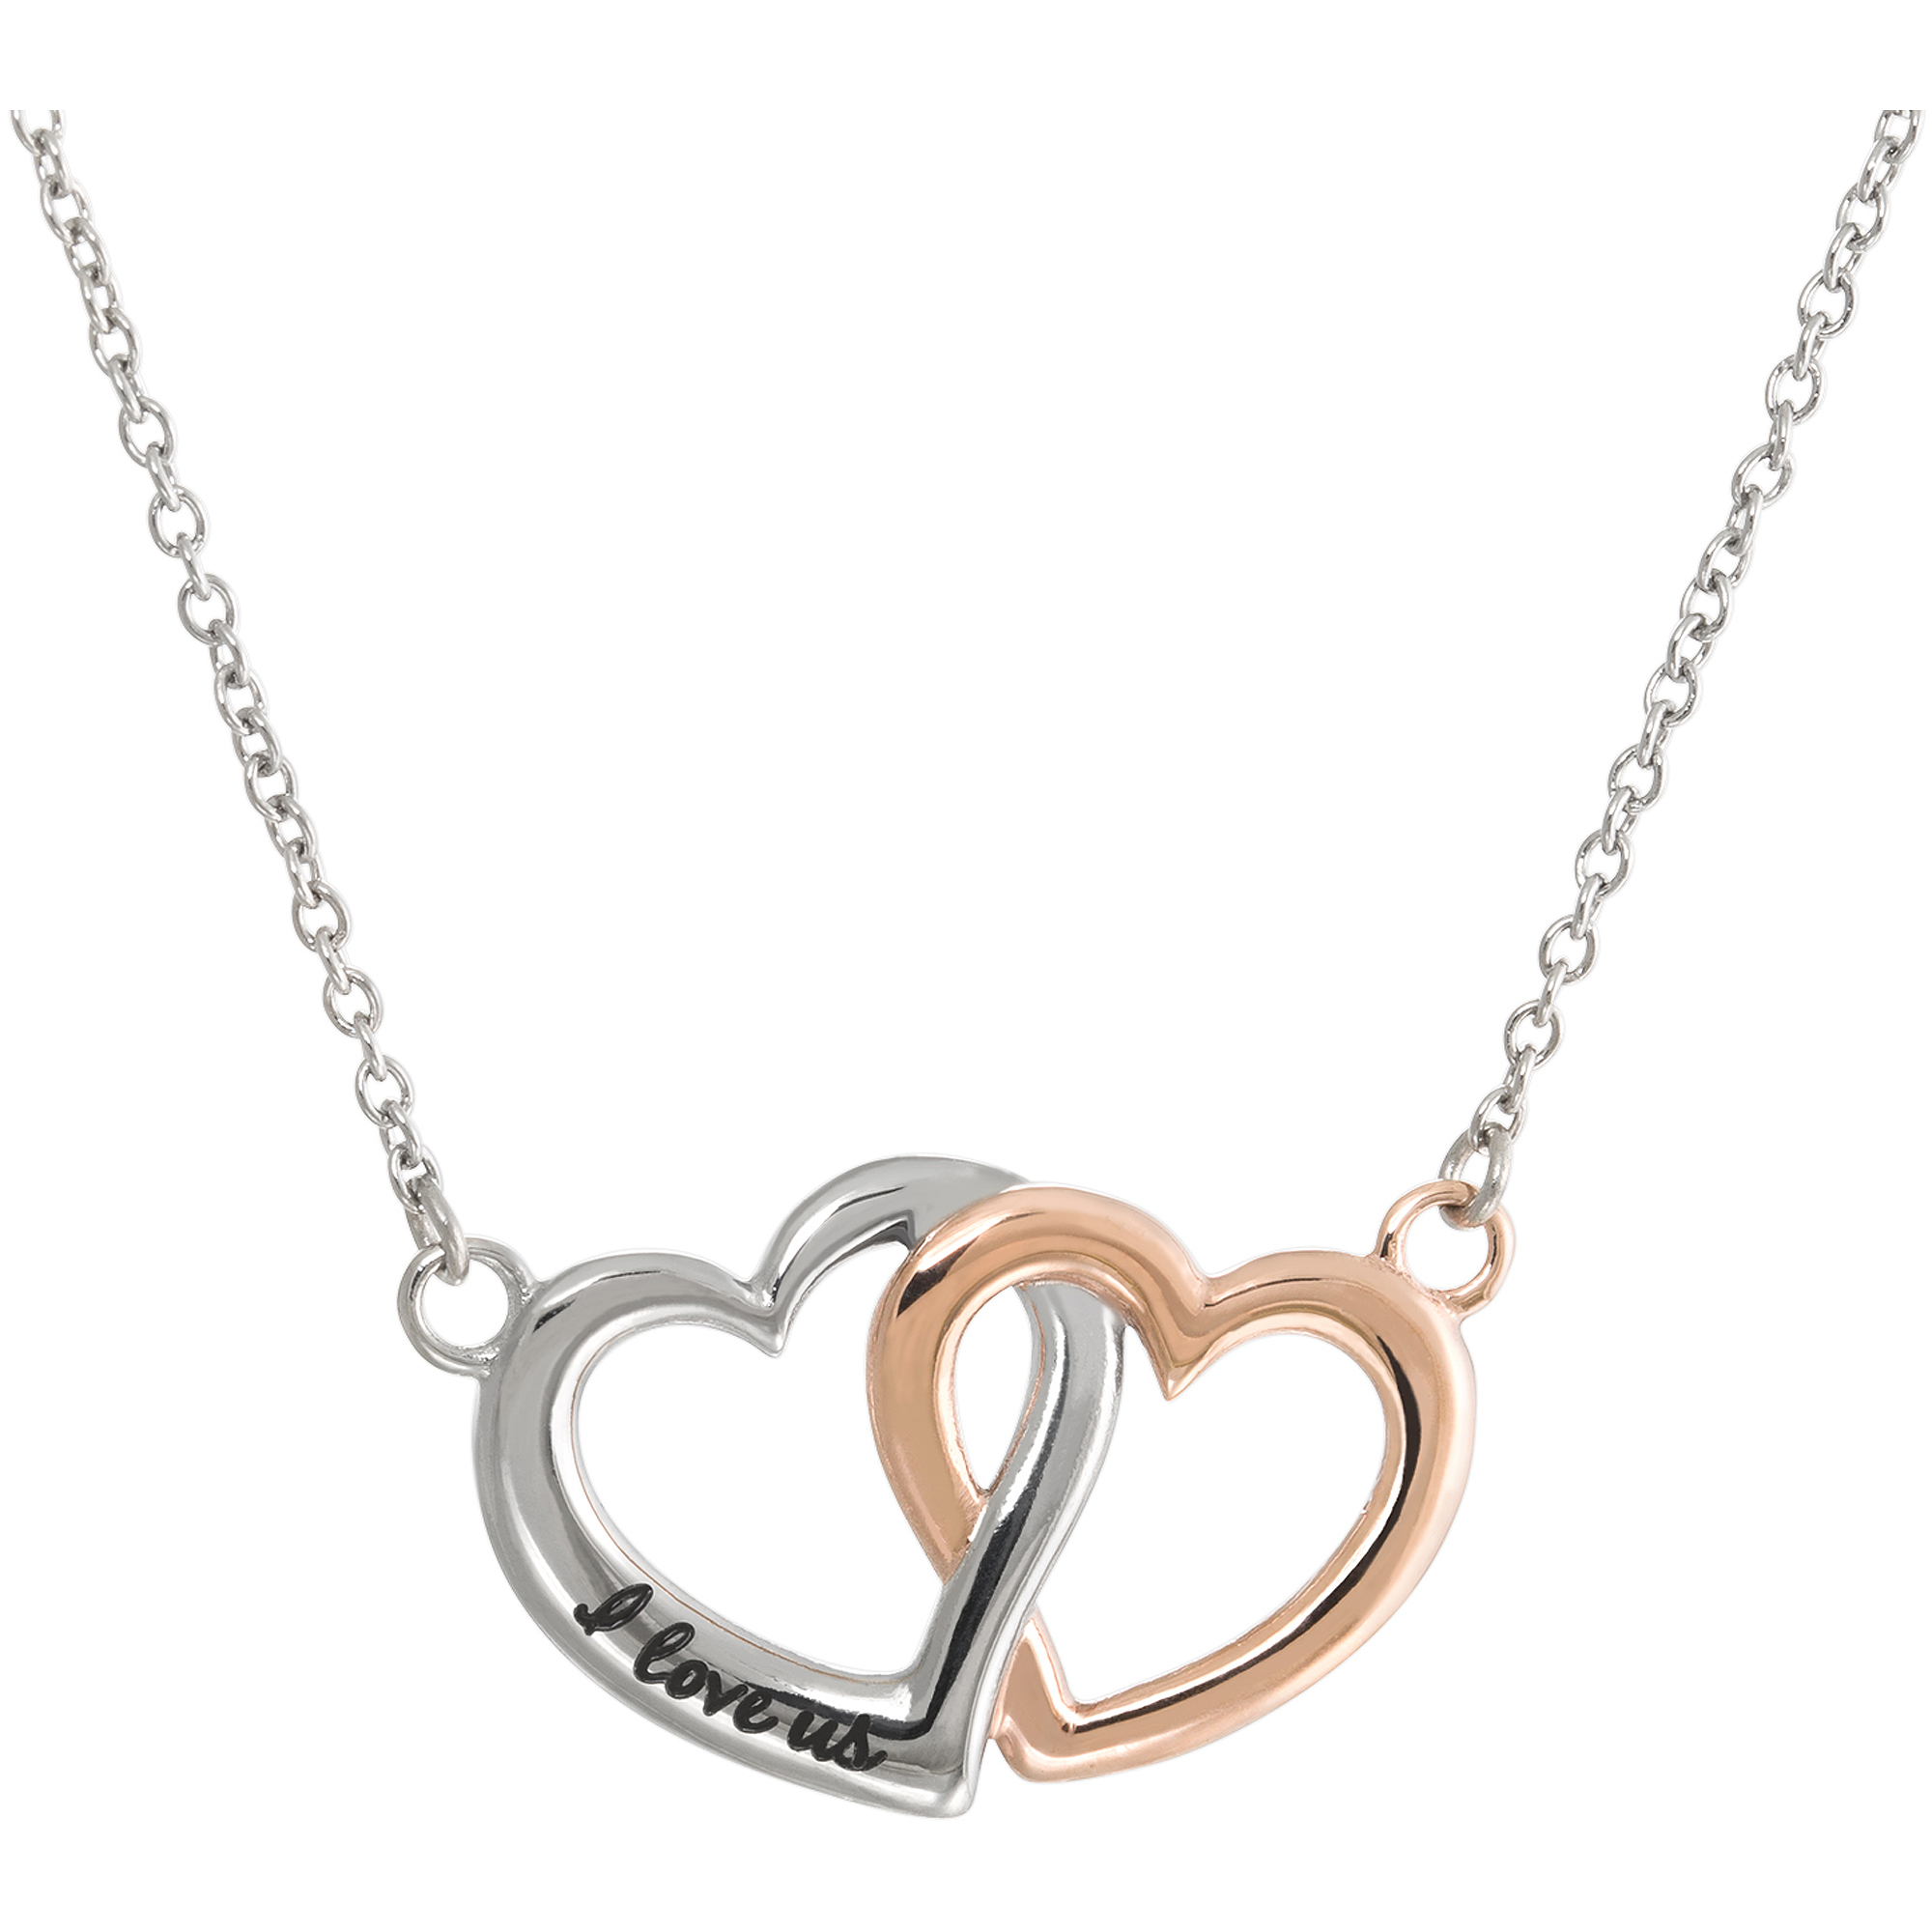 heart necklace sterling silver faith hope love heart with cross necklace - walmart.com gtxhyct